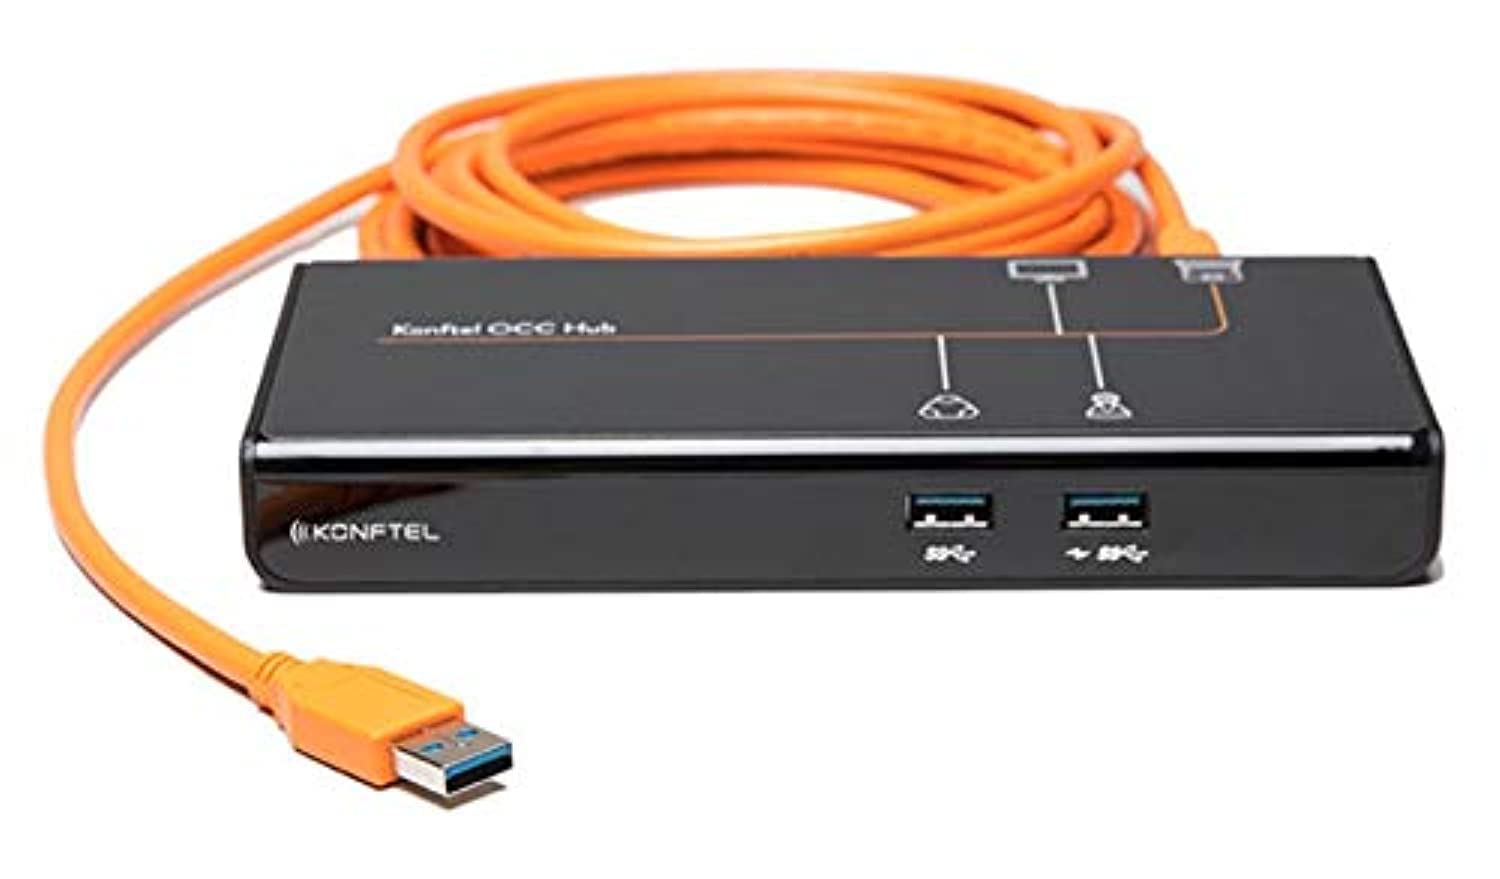 Konftel OCC Hub One Cable Connection, 900102149 (One Cable Connection 1xUSB 3.0, 2xUSB 2.0, 1xHDMI)